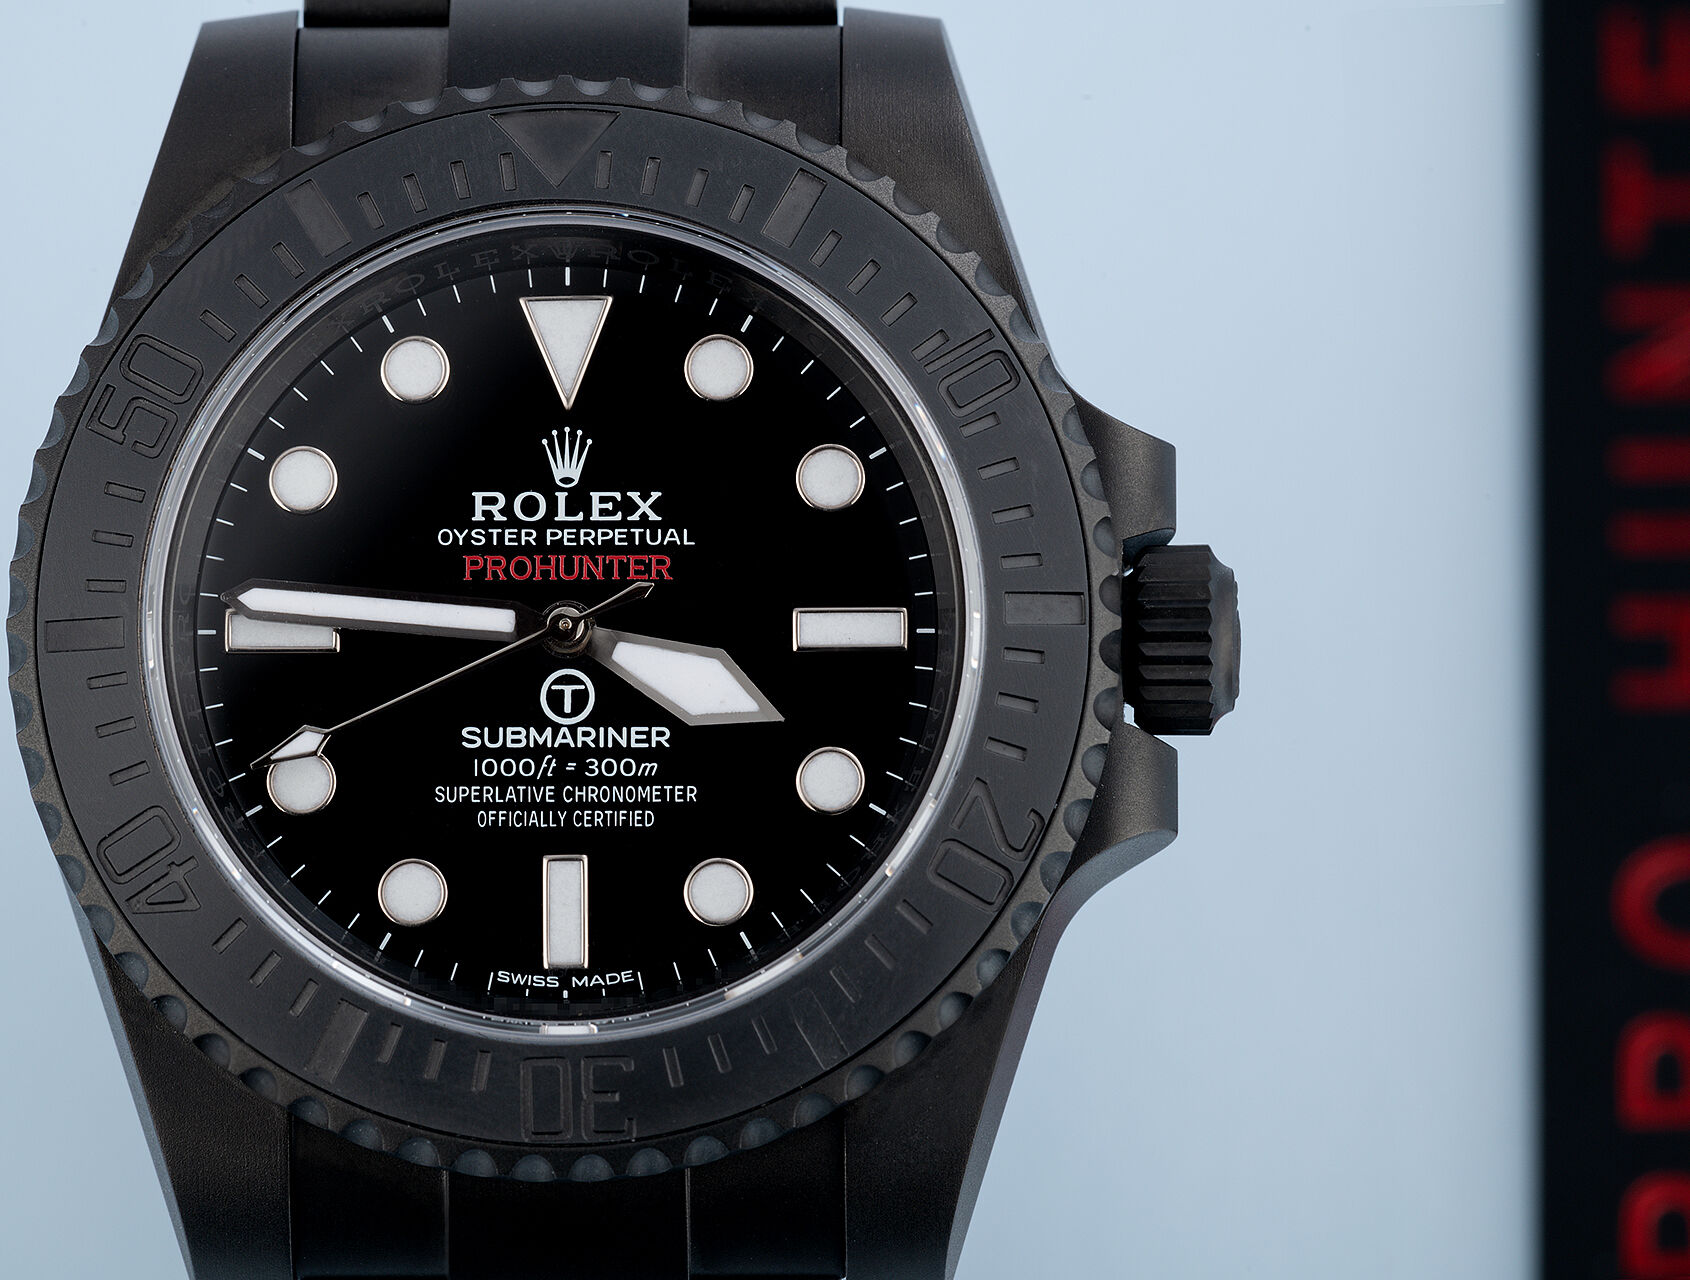 ref 114060 | Limited Edition - 5 Year Warranty | Pro Hunter Submariner Military